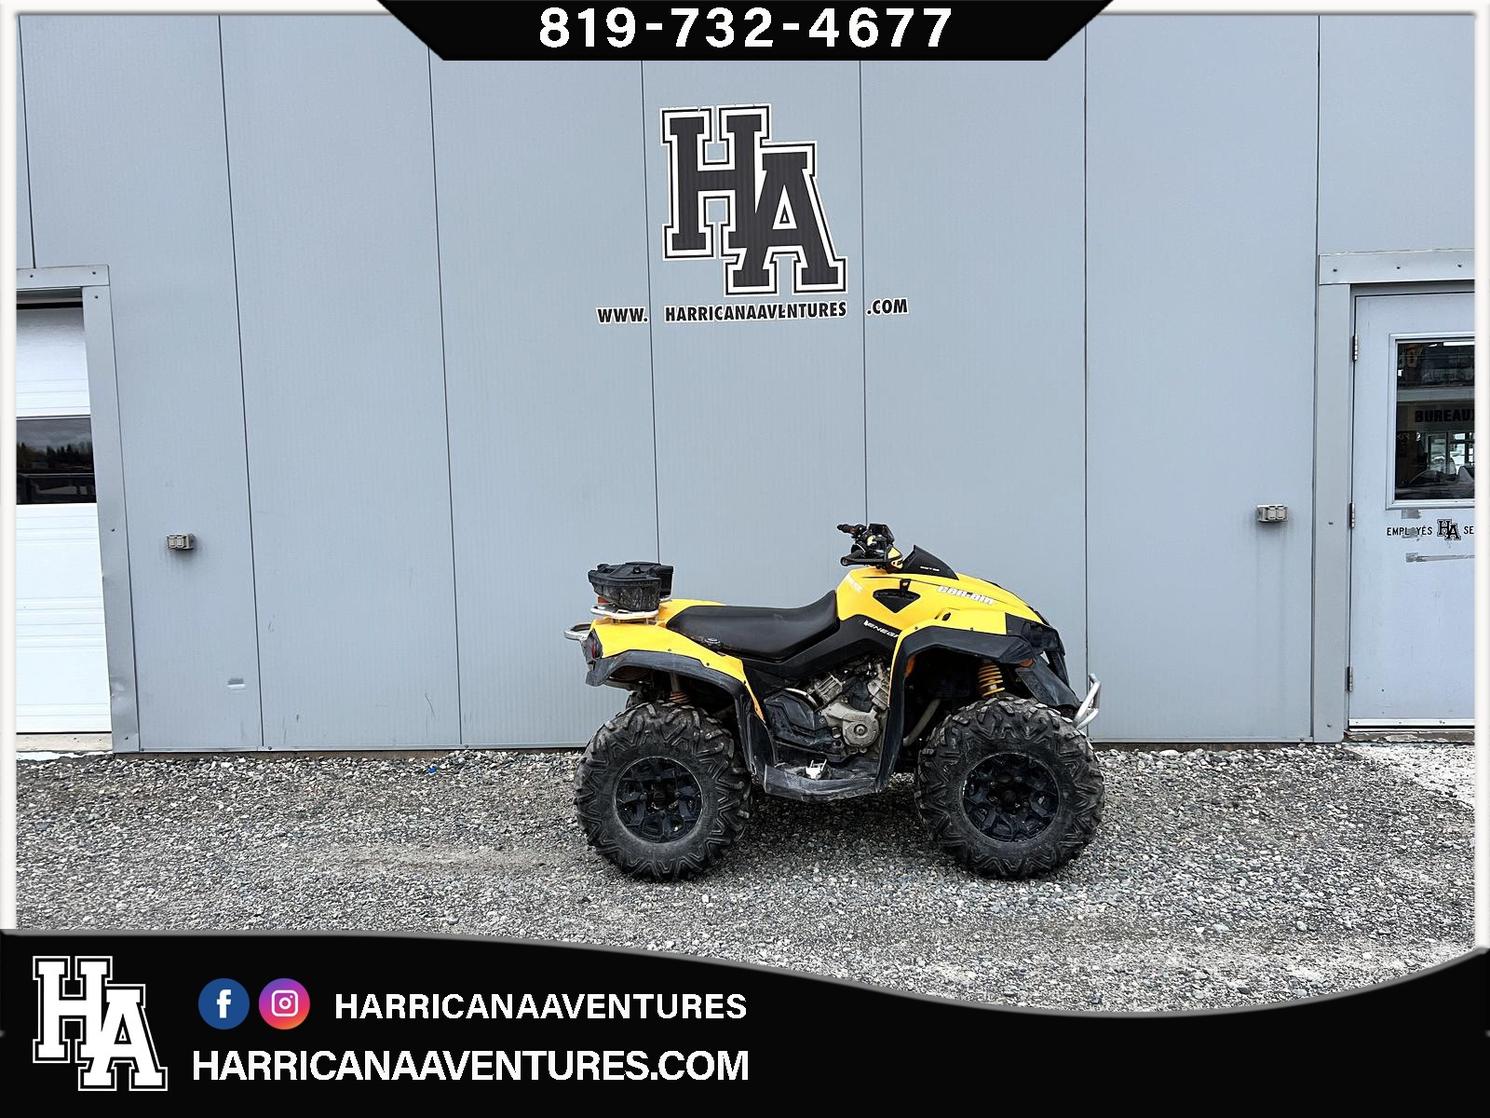 2013 Can-am renegade 800r